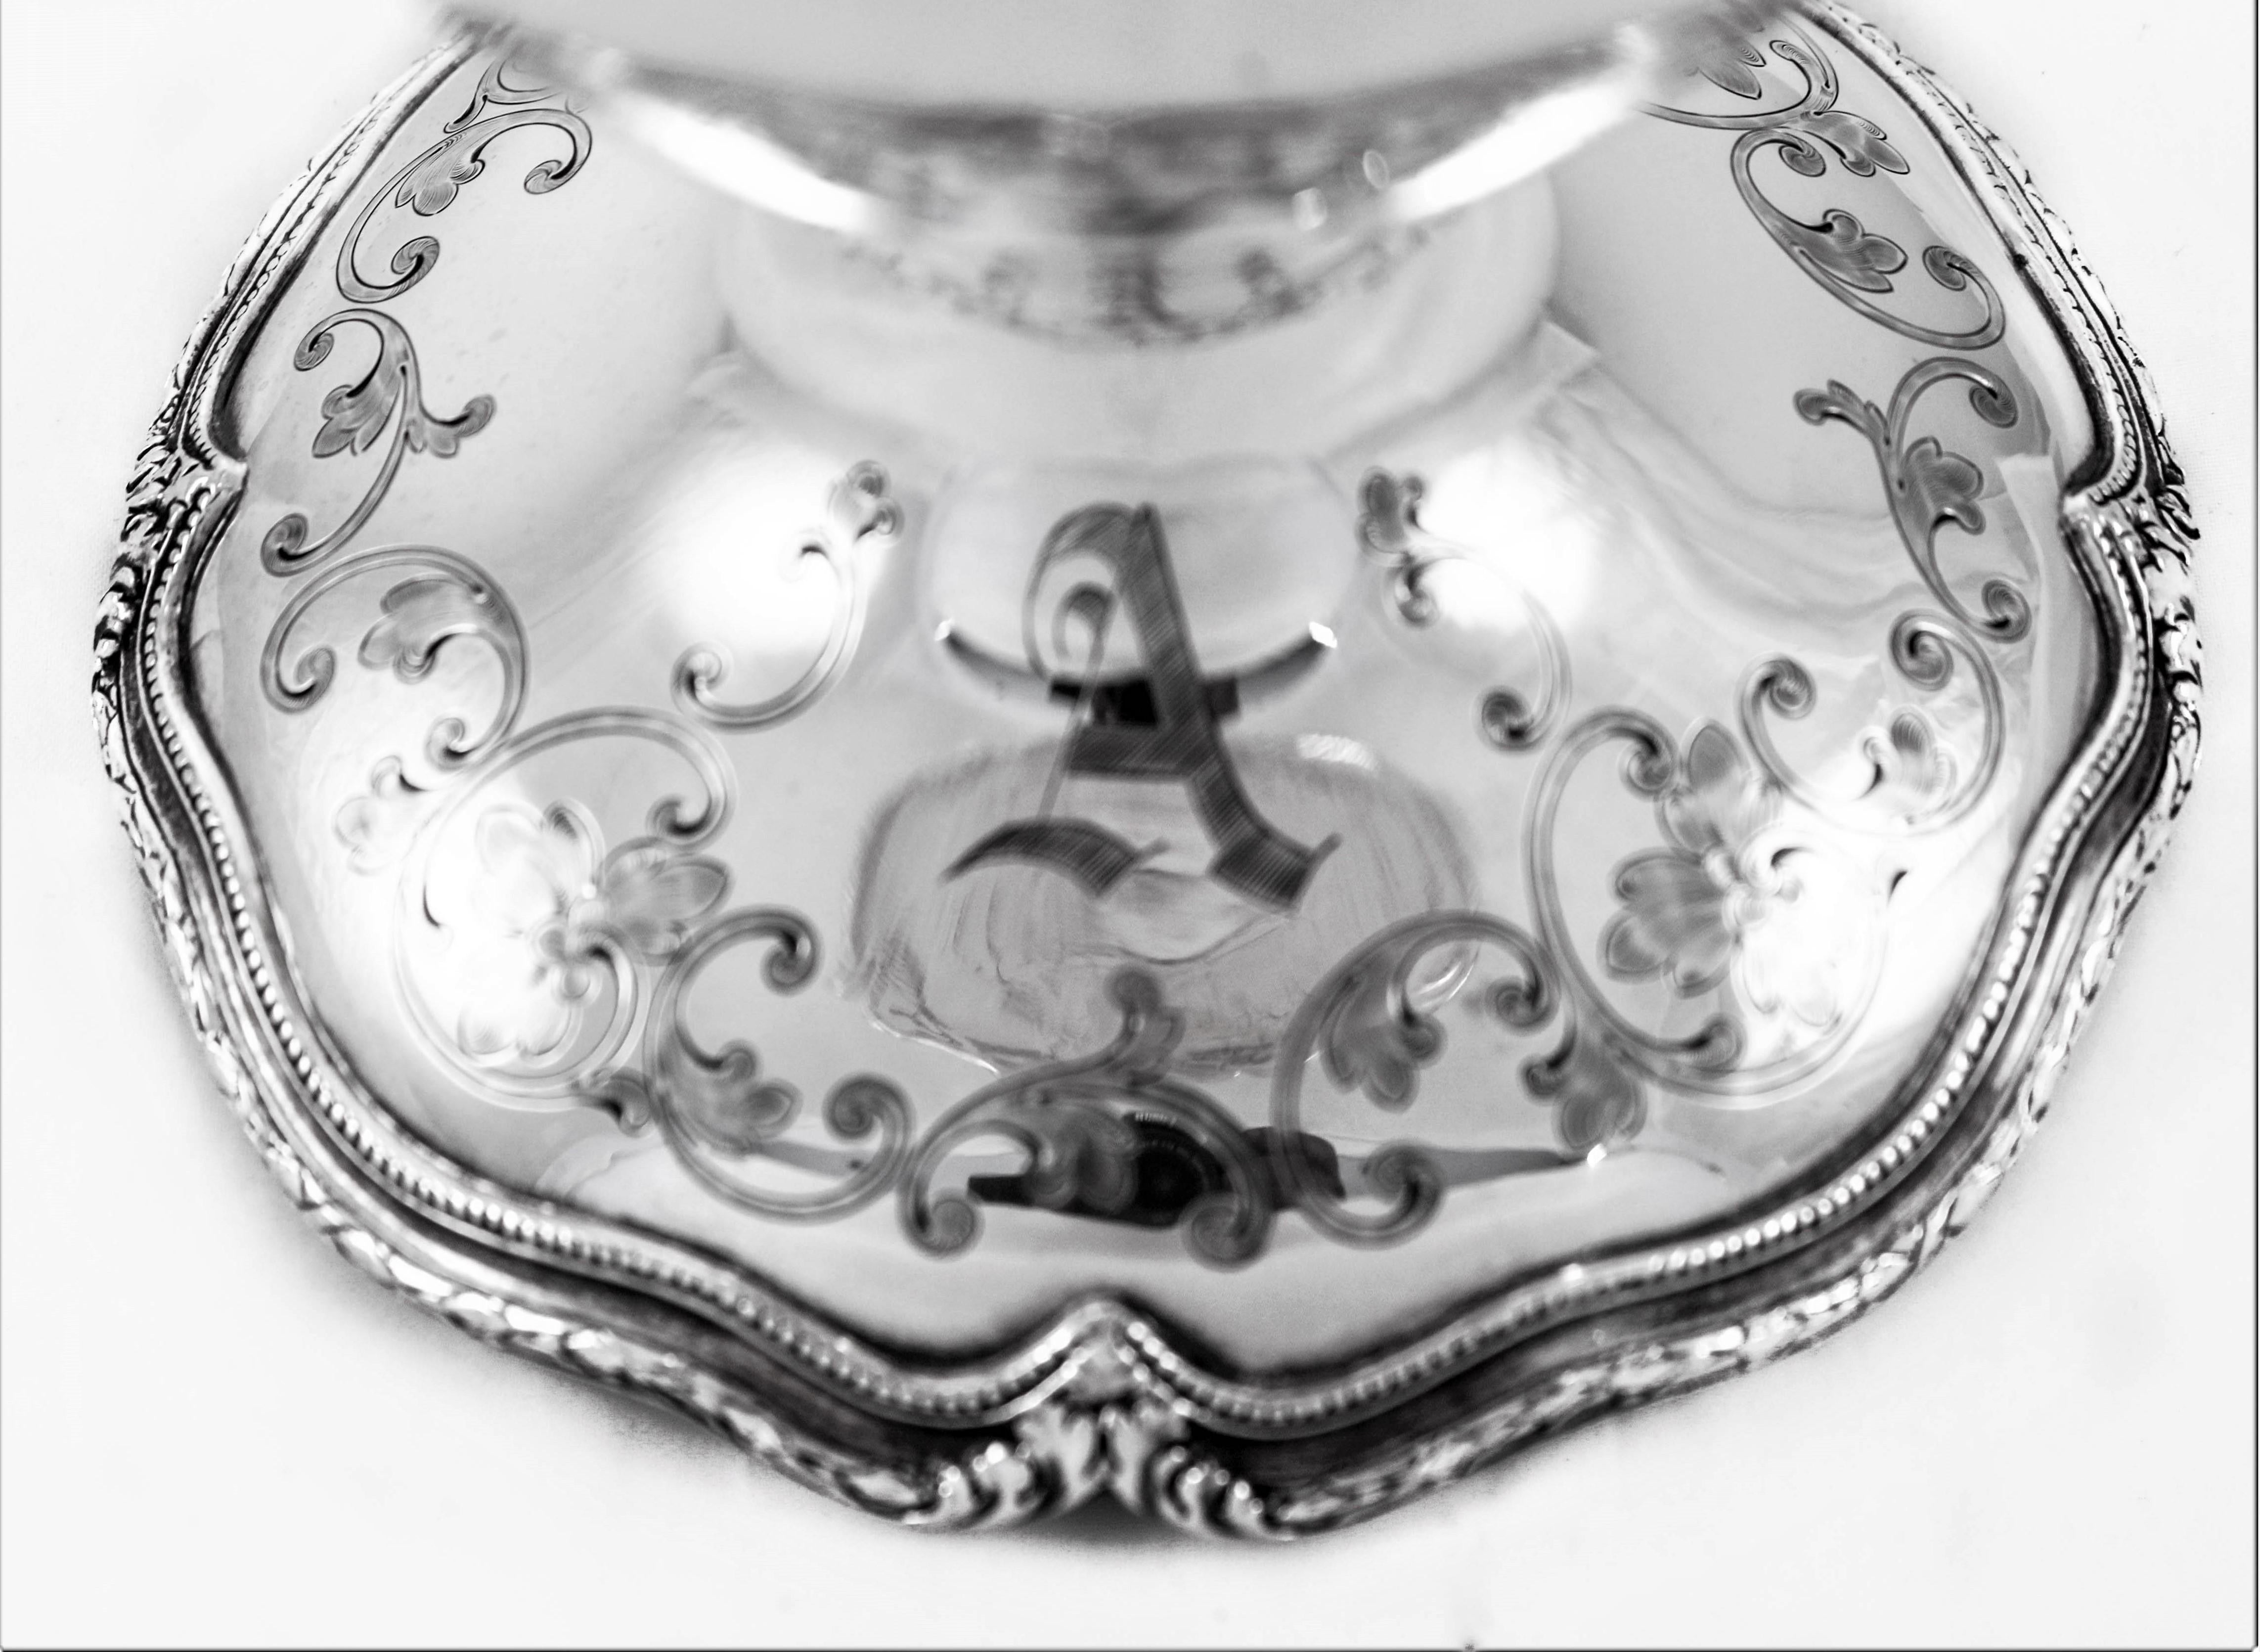 This rose bowl by Shreve & Company is a wonderful example of Victorian style silver. Decorated with etched flowers, leaves and swirls along the rim, body and base. The base and rim have a scalloped edge with the same matching pattern. Unlike most